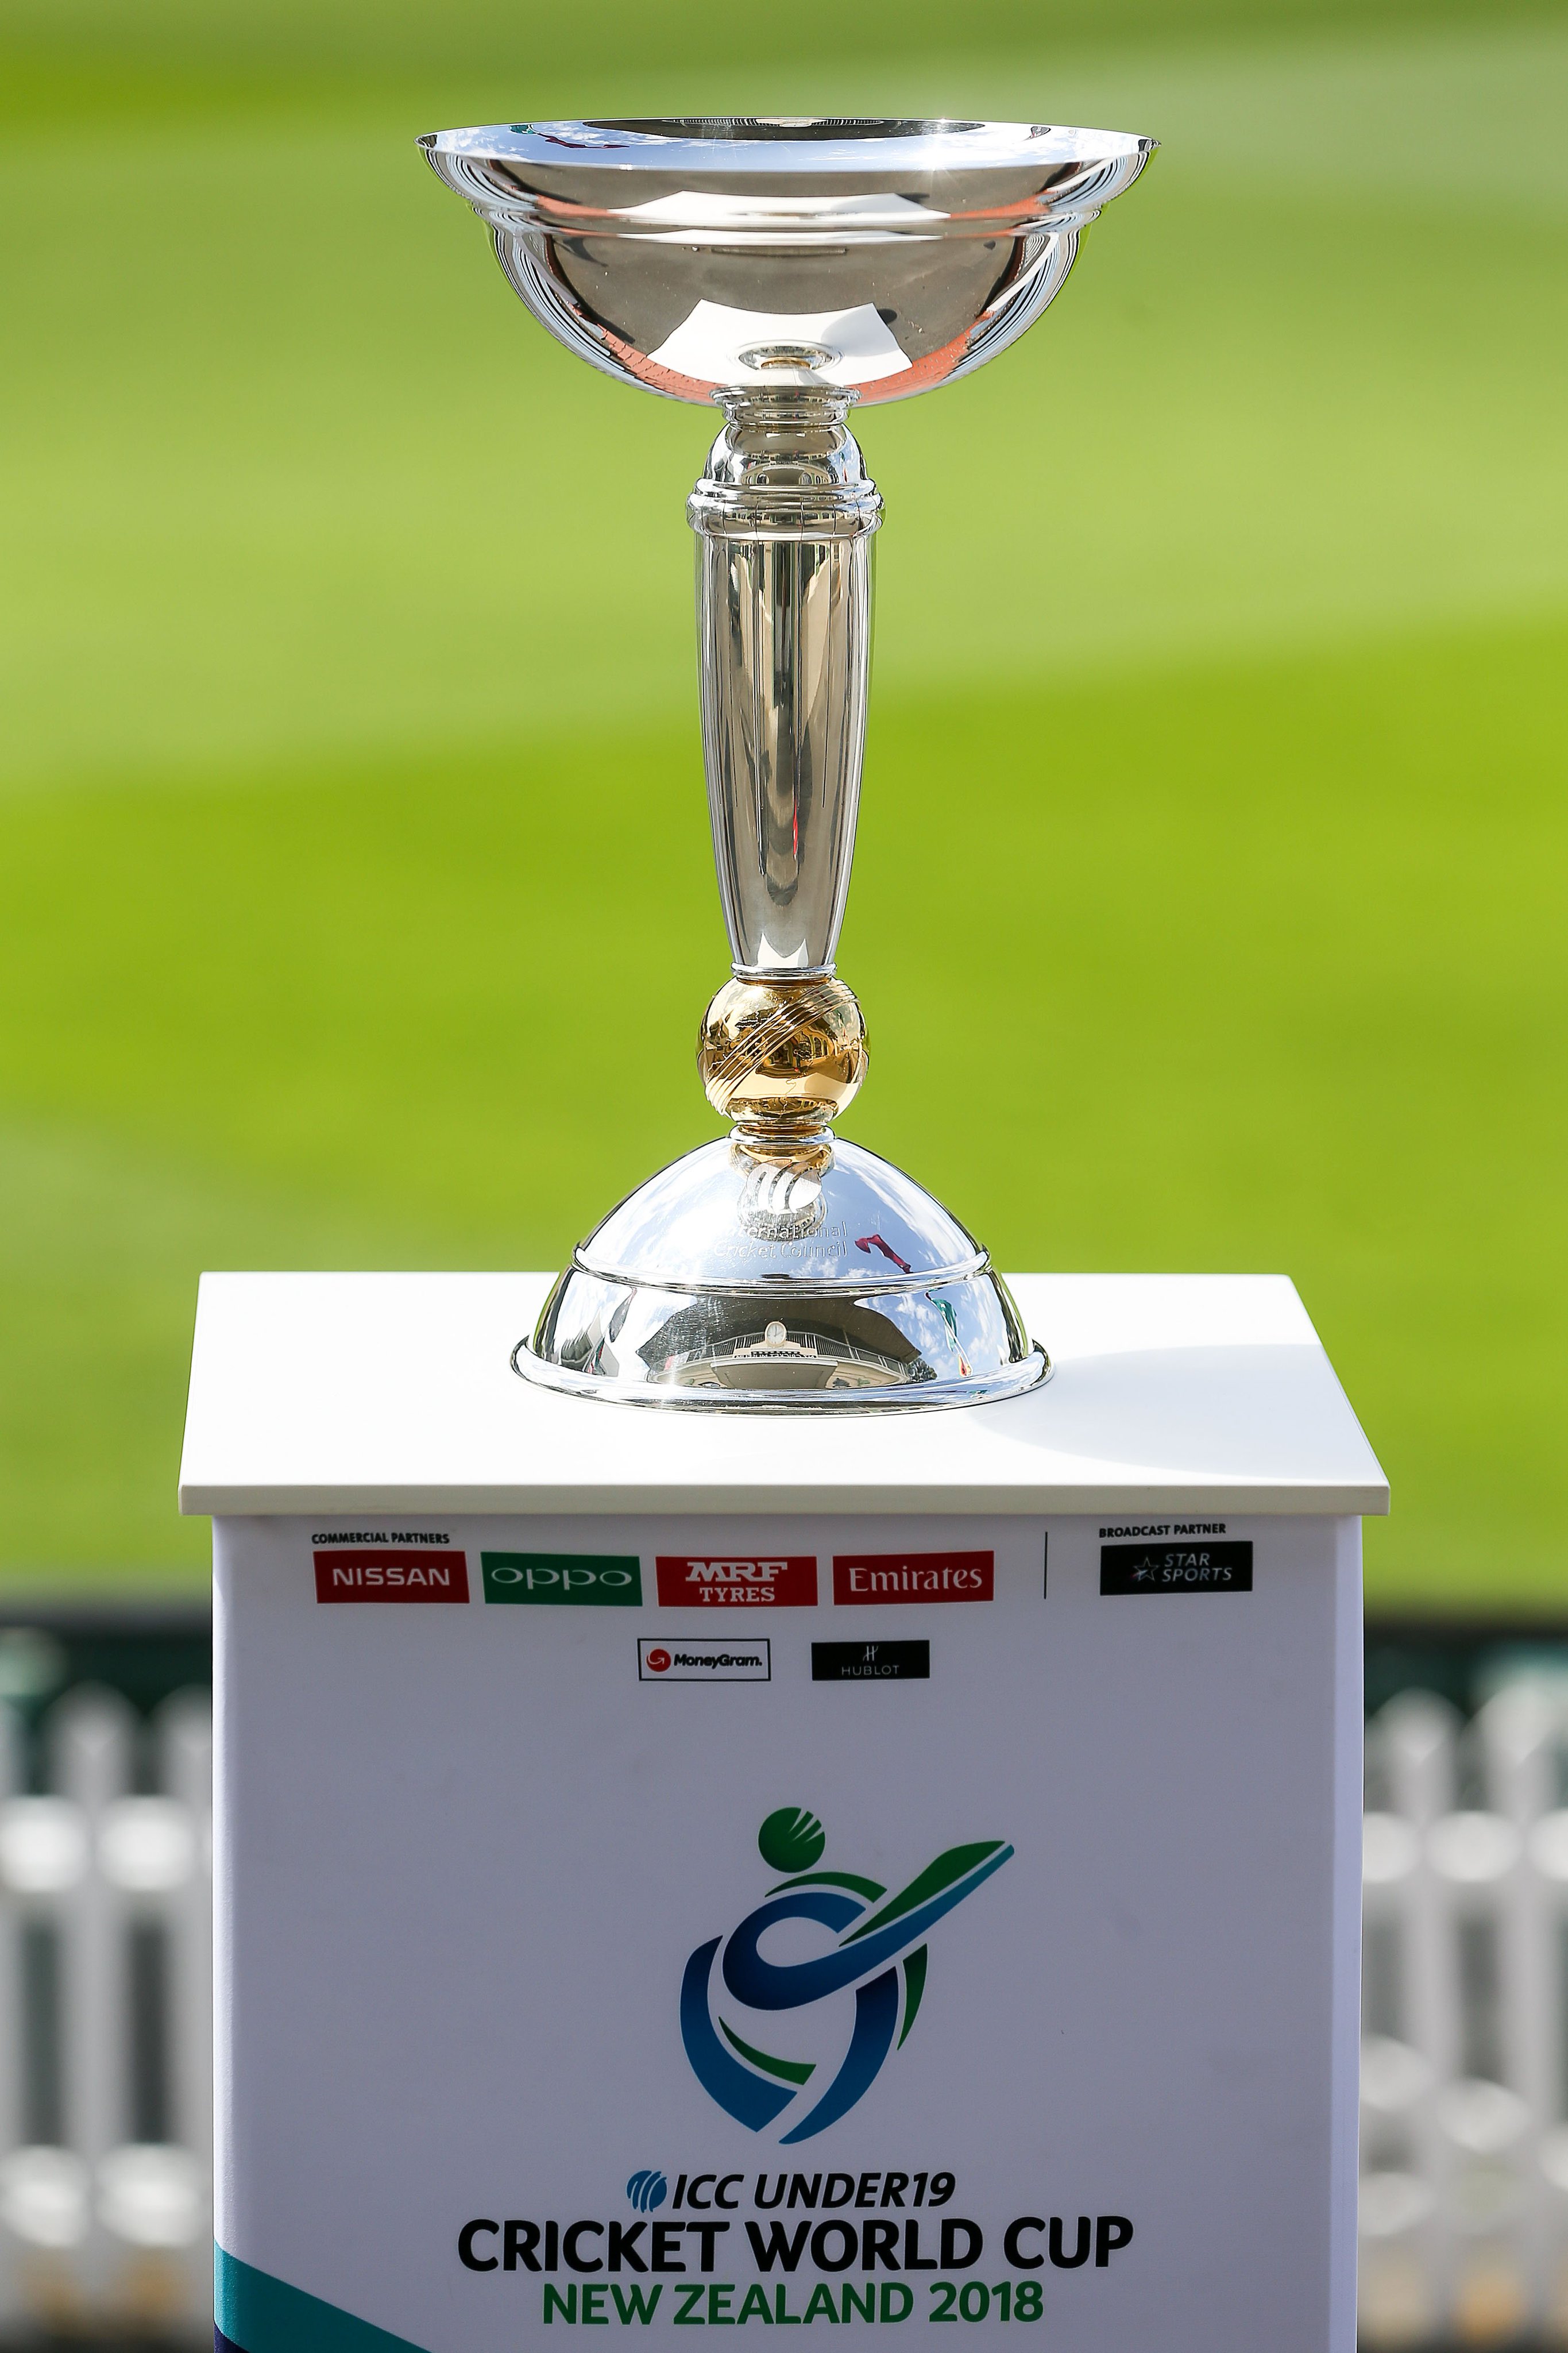 Icc The Icc U19 Cricket World Cup 18 Was Launched In Wellington With Just 44 Days To Go Until The 16 Team Event Who Do You Think Will Lift This Trophy